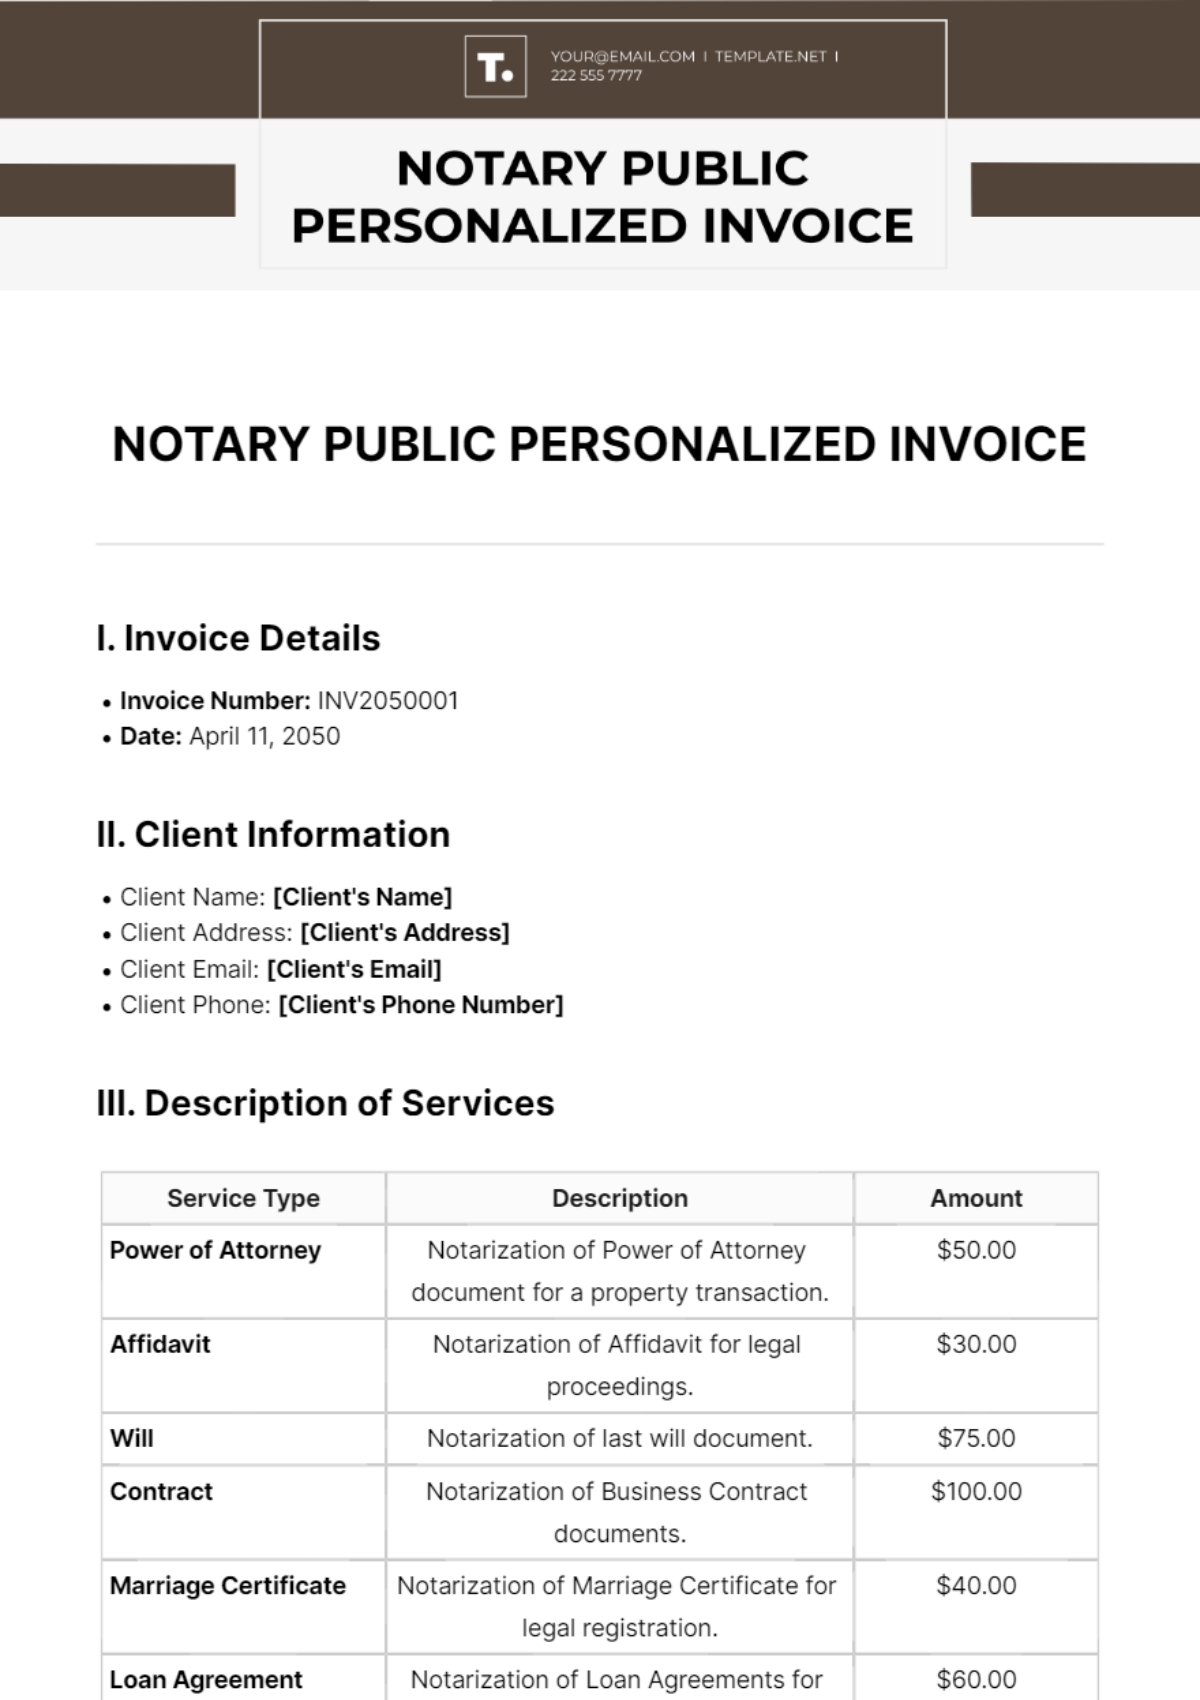 Free Notary Public Personalized Invoice Template